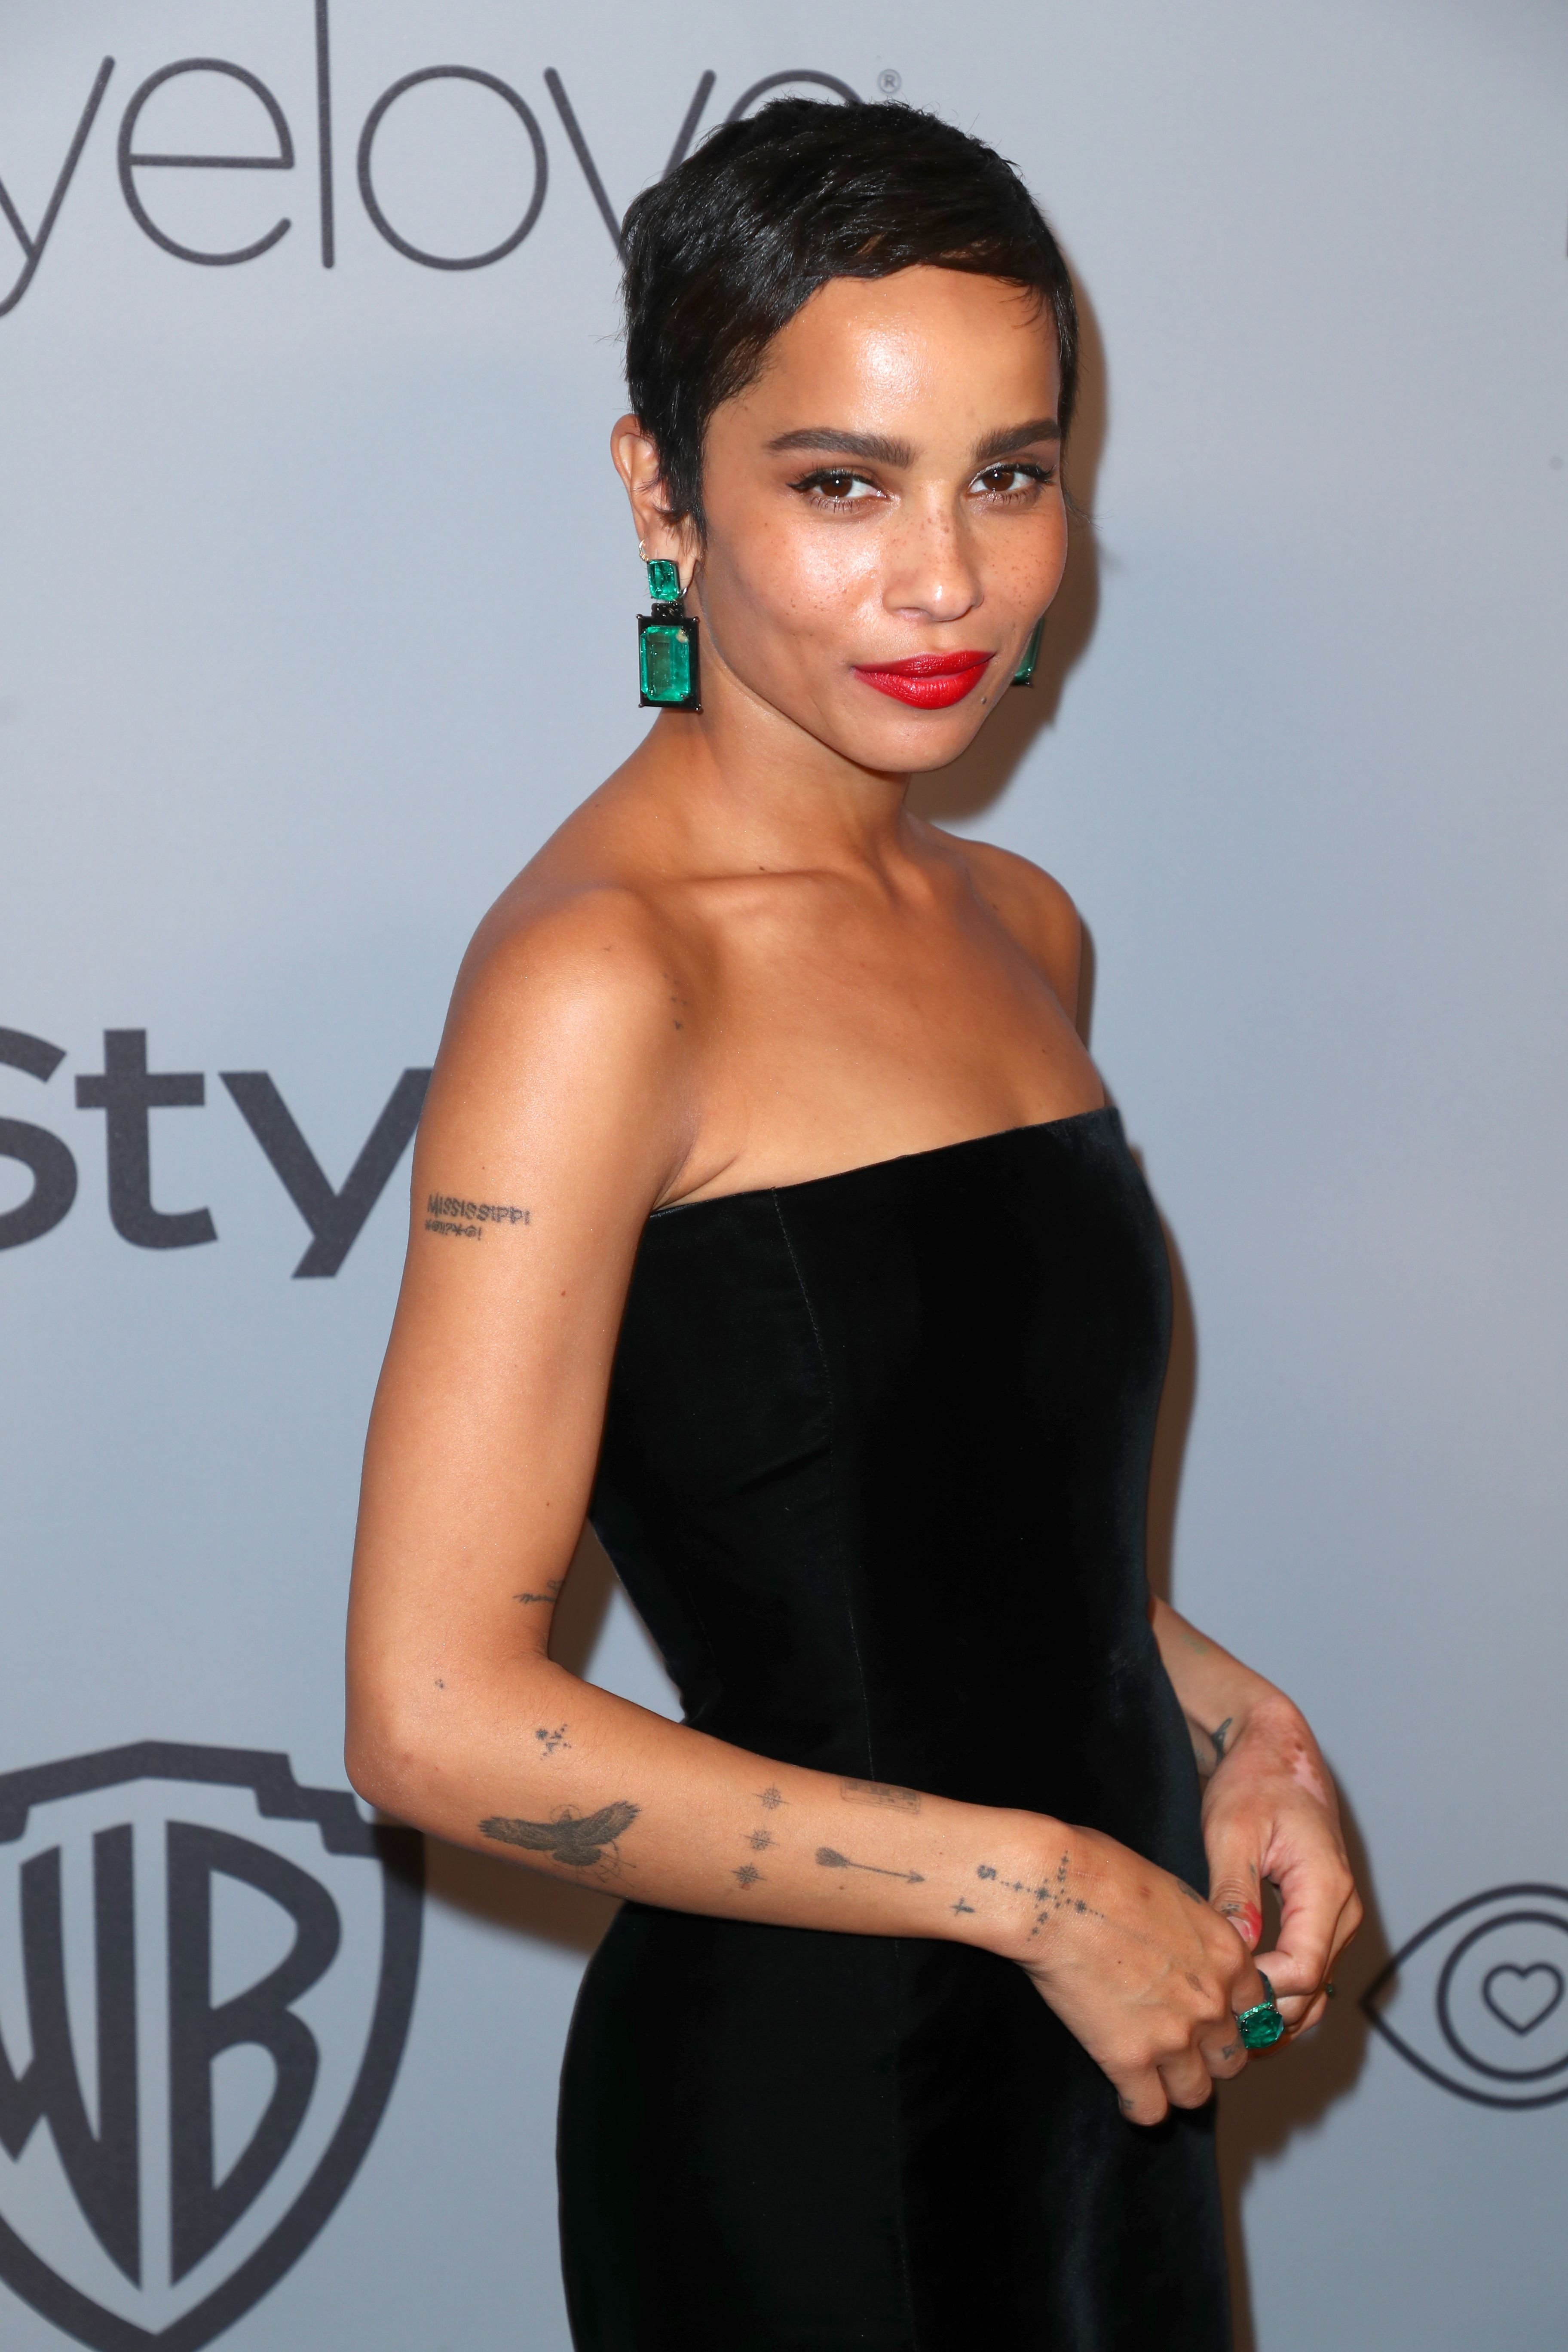 Zoe Kravitz during the 2018 InStyle and Warner Bros. 75th Annual Golden Globe Awards Post-Party at The Beverly Hilton Hotel on January 7, 2018, in Beverly Hills, California. | Source: Getty Images